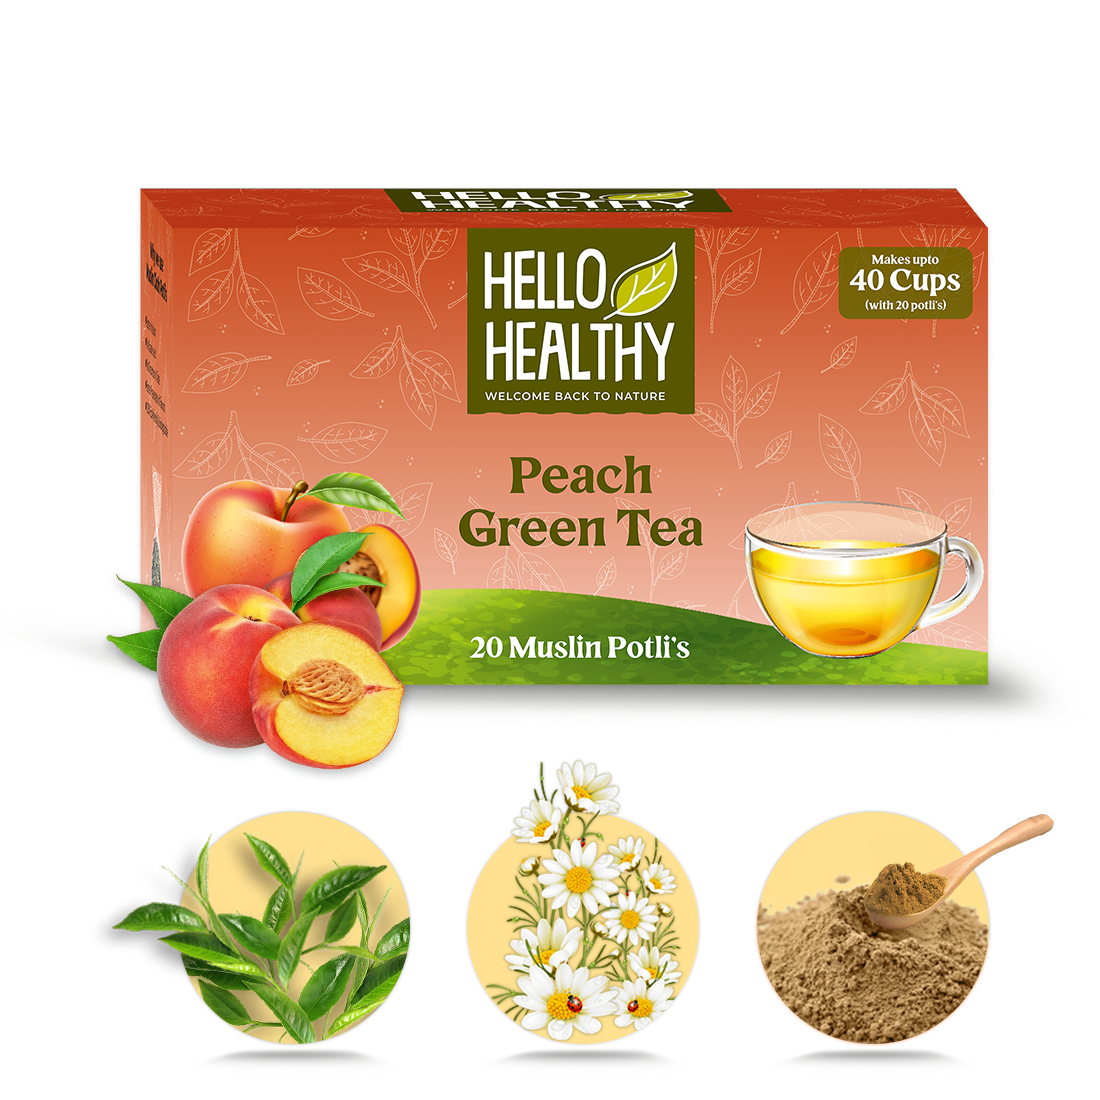 Peach Green Tea Bags Pack of 20 Bags Makes Up to 40 Cups Helps In Constipation , Lowers Blood Sugar & Weight Lose